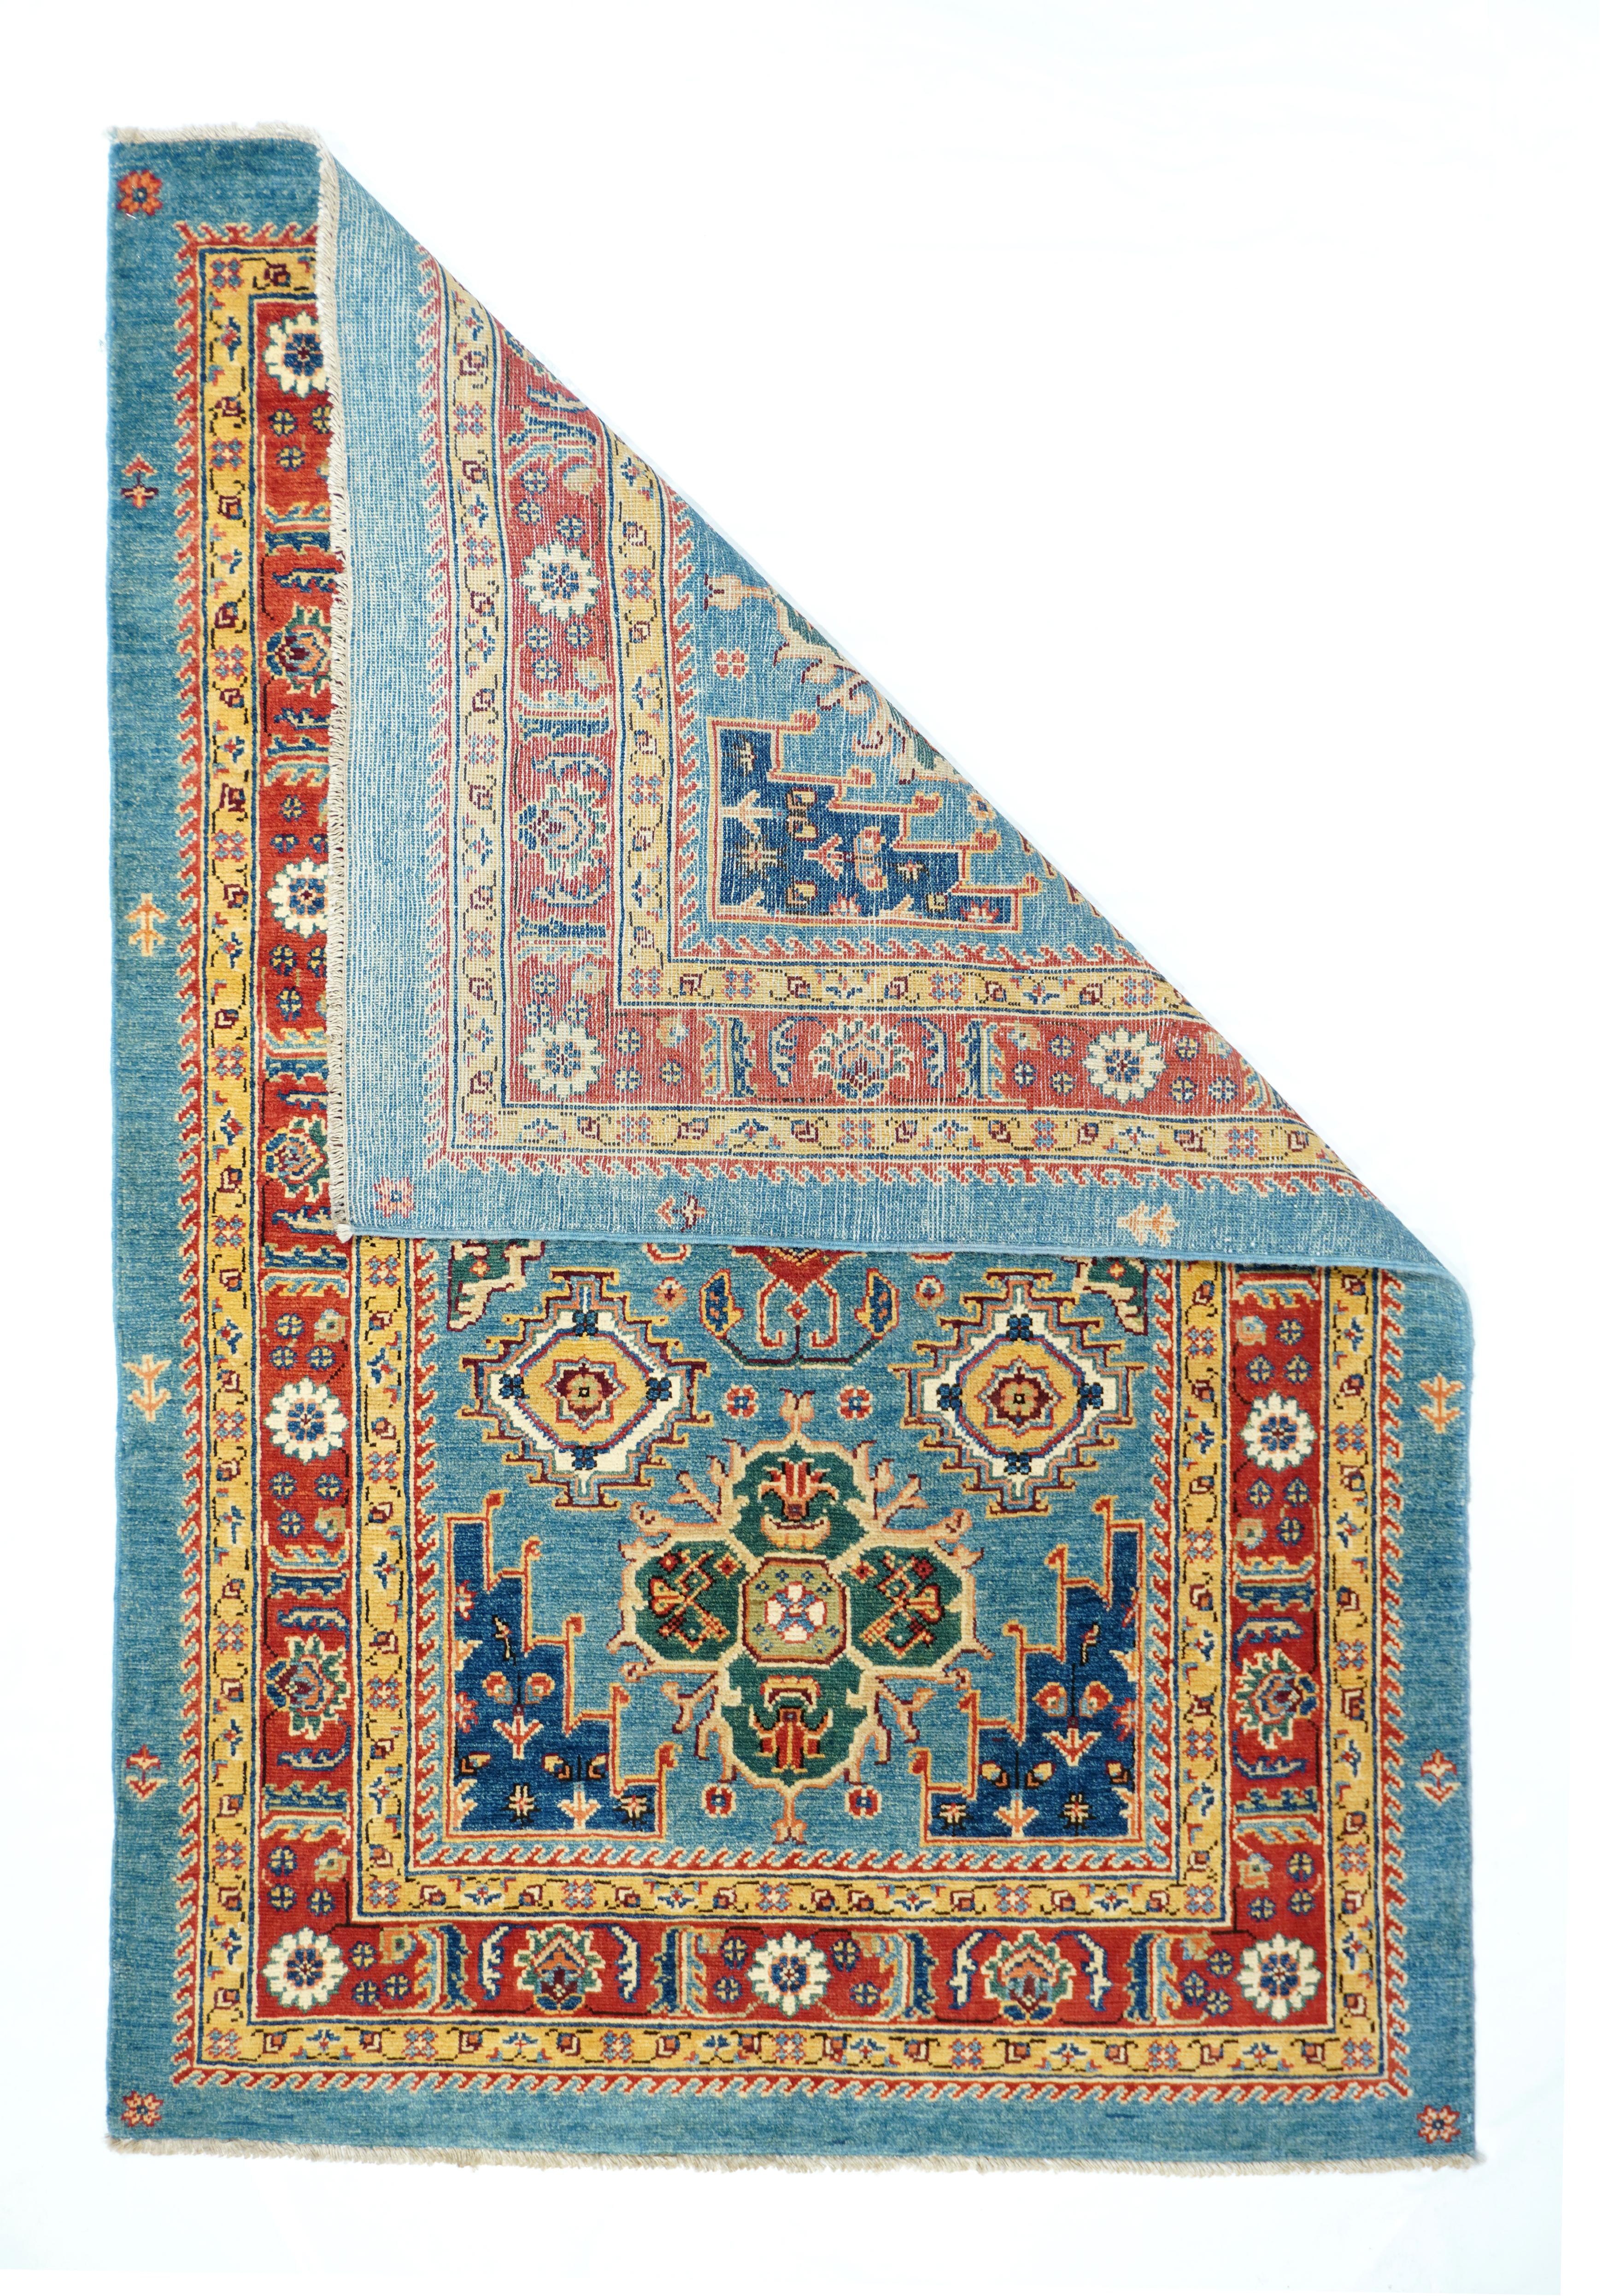 Kazak Rug 4' x 6'. This delightfully colorful modern rug shows an interesting combination of Caucasian and Persian Heriz designs. The red border features rosettes alternating with fringed leaves inn the Heriz style while the light blue field shows